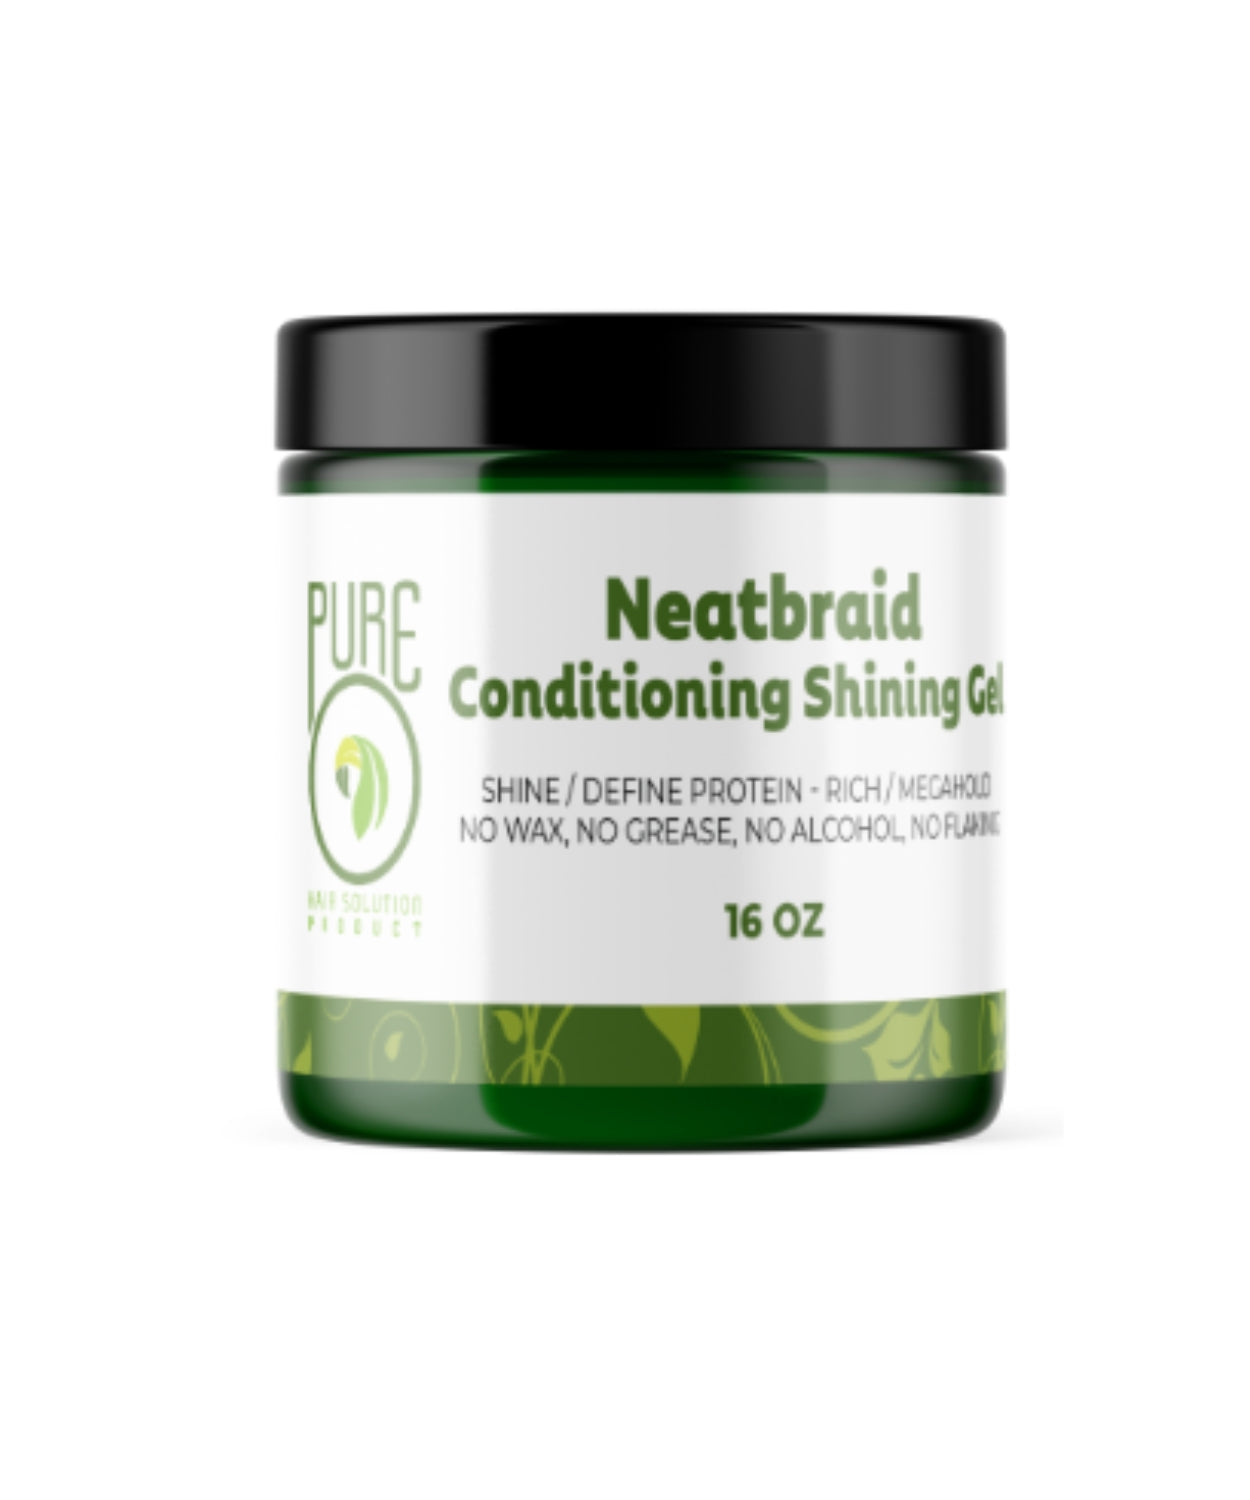 Pure O Natural Neat Braid Conditioning Shining Gel - 16 oz